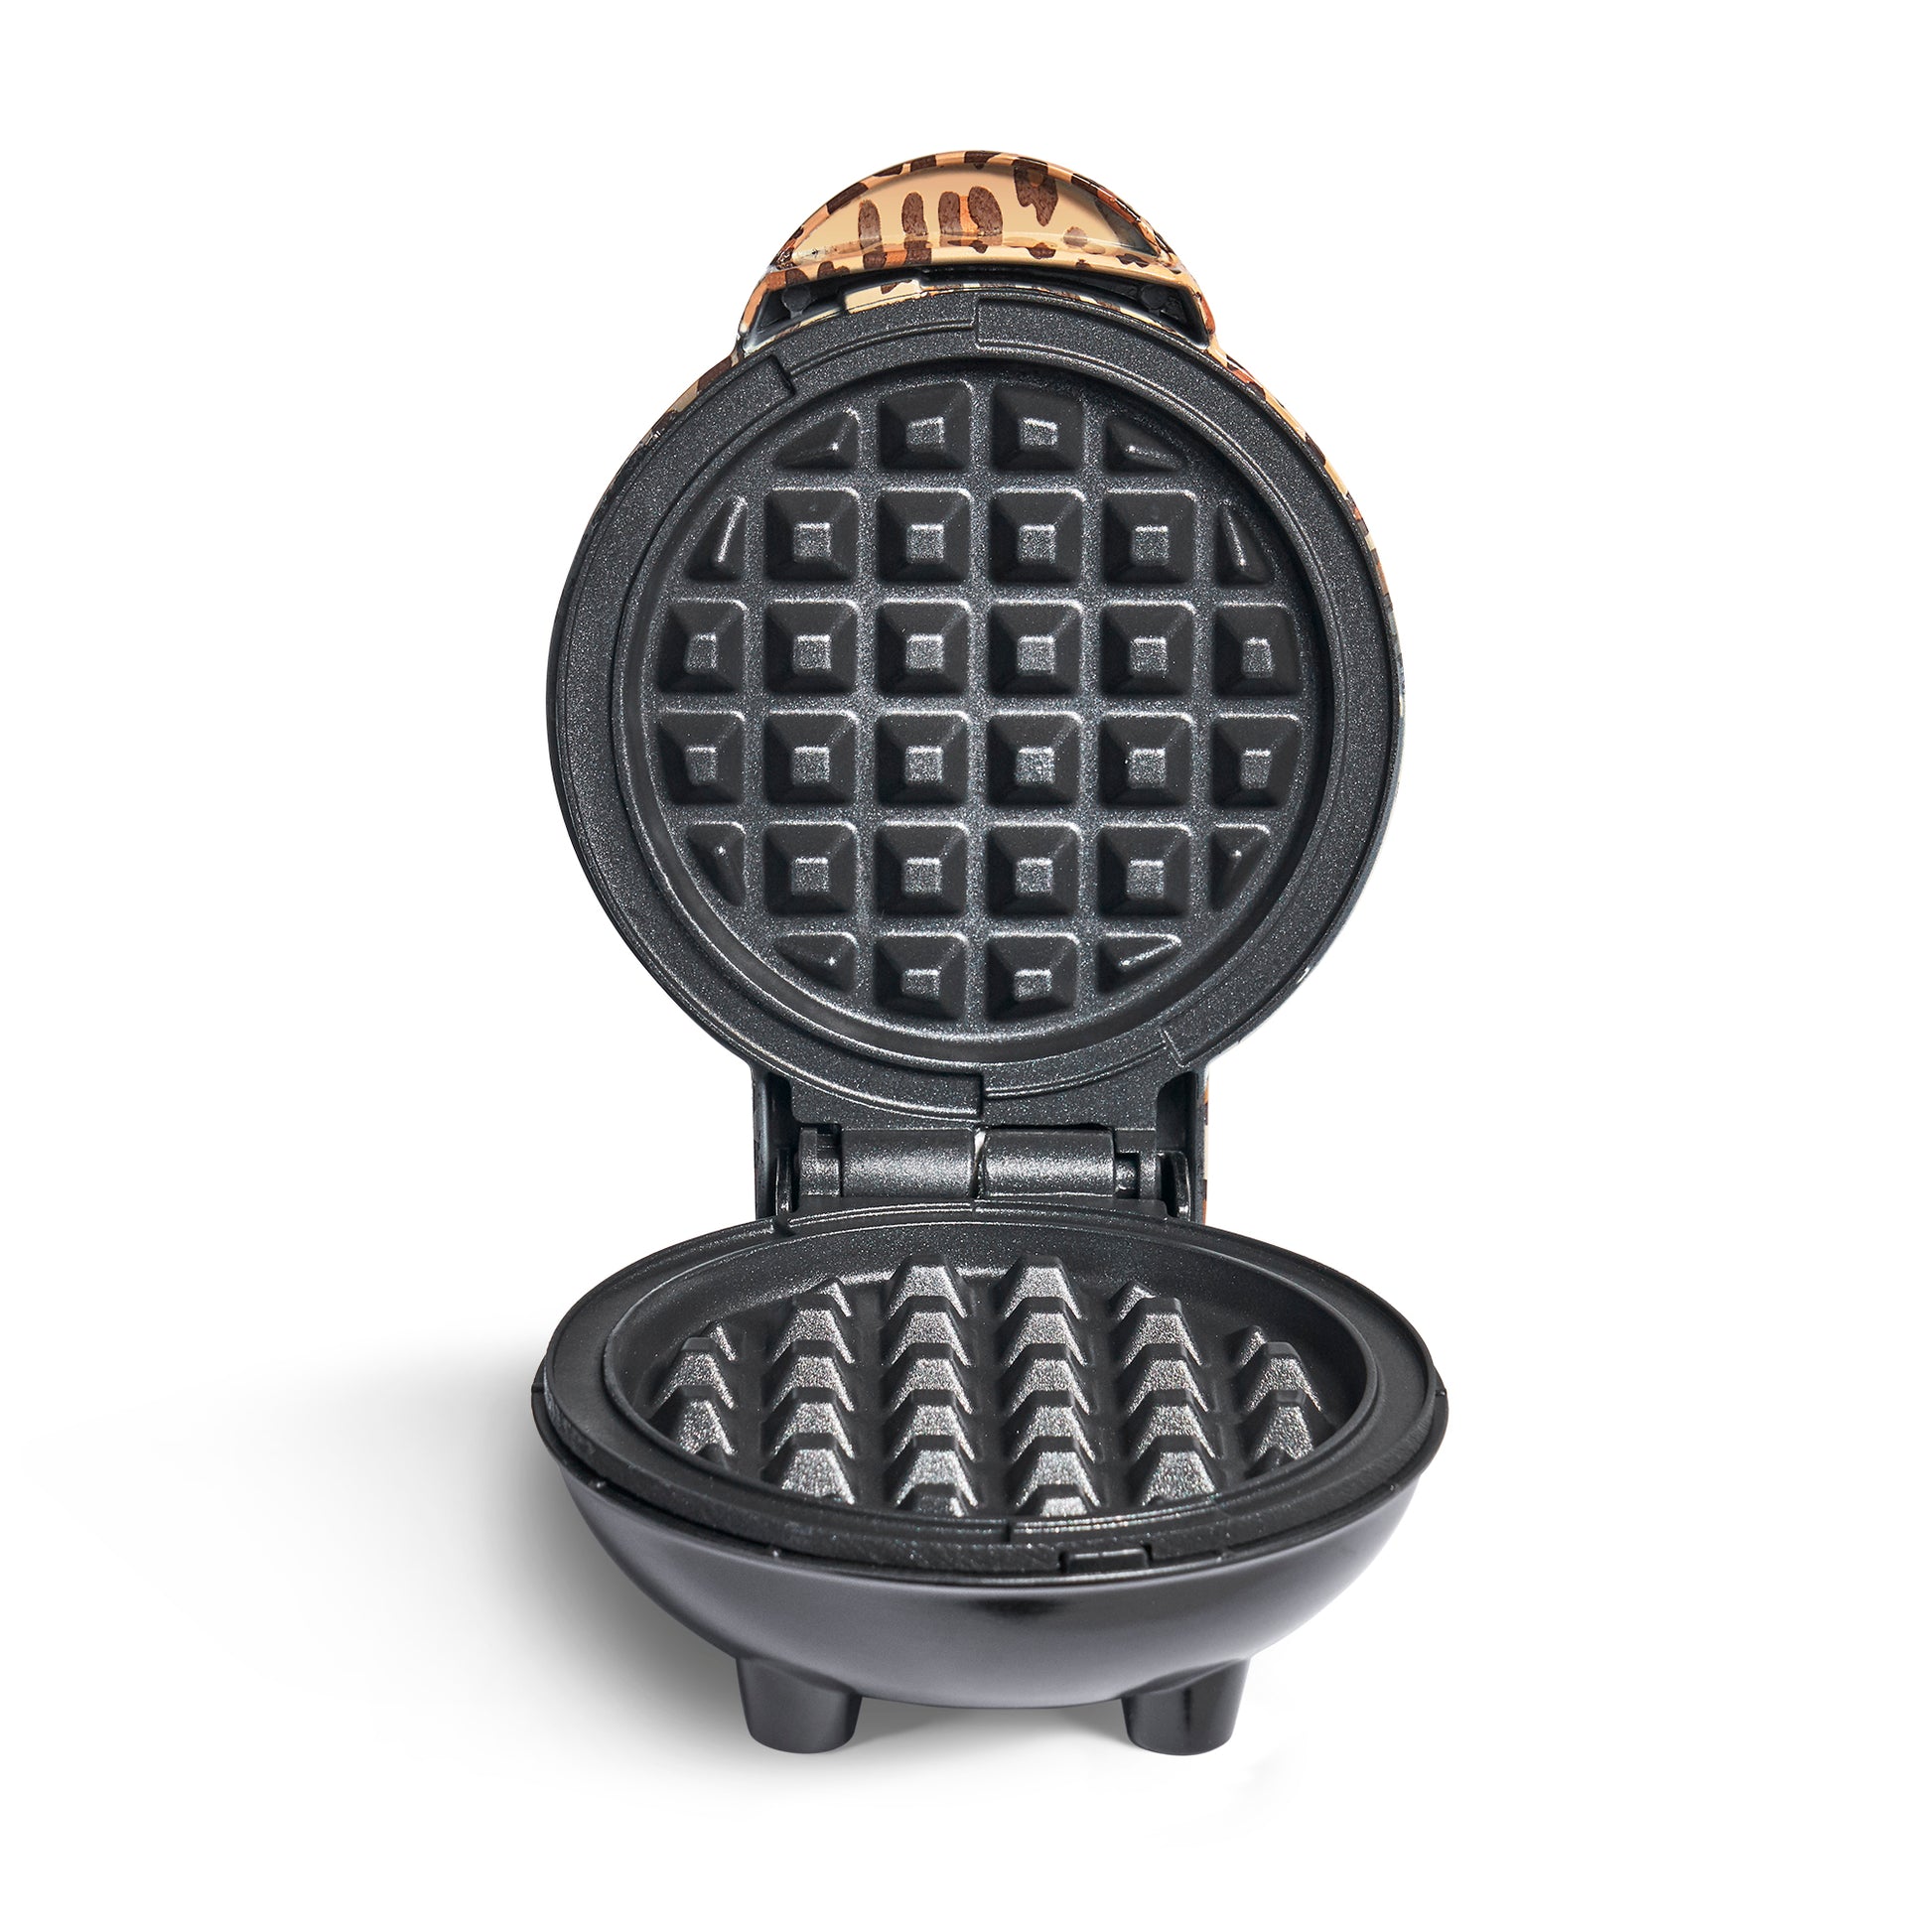  DASH Mini Waffle Maker (2 Pack) for Individual Waffles Hash  Browns, Keto Chaffles with Easy to Clean, Non-Stick Surfaces, 4 Inch, Red:  Home & Kitchen